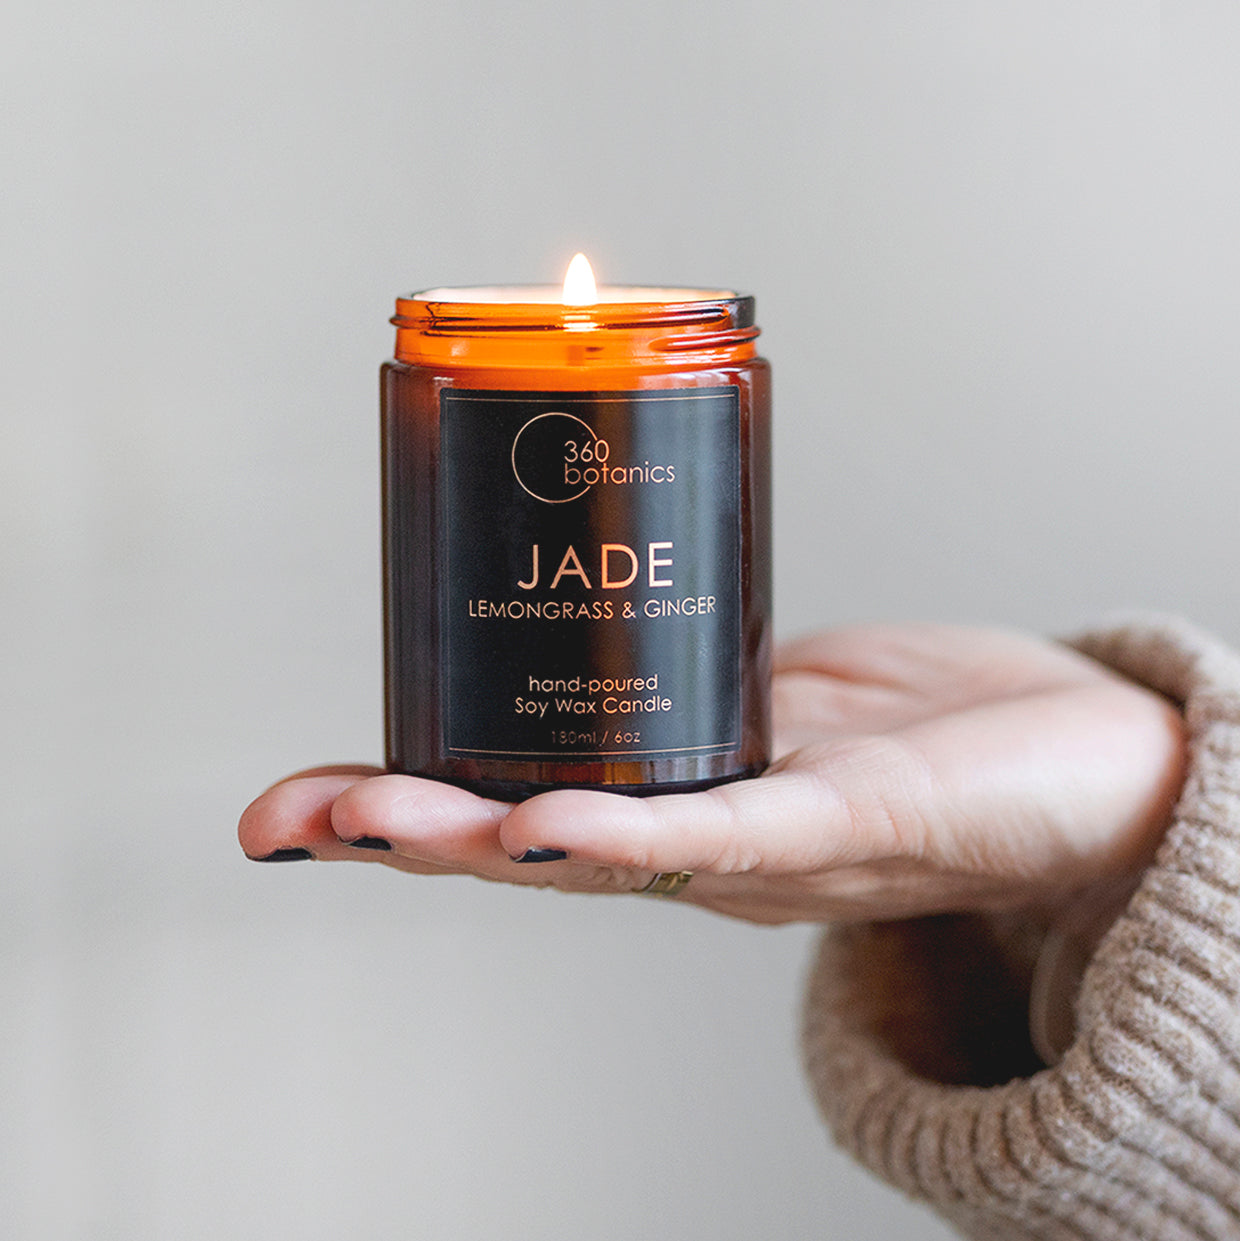 Jade candle in amber jar glowing held out on woman's hand